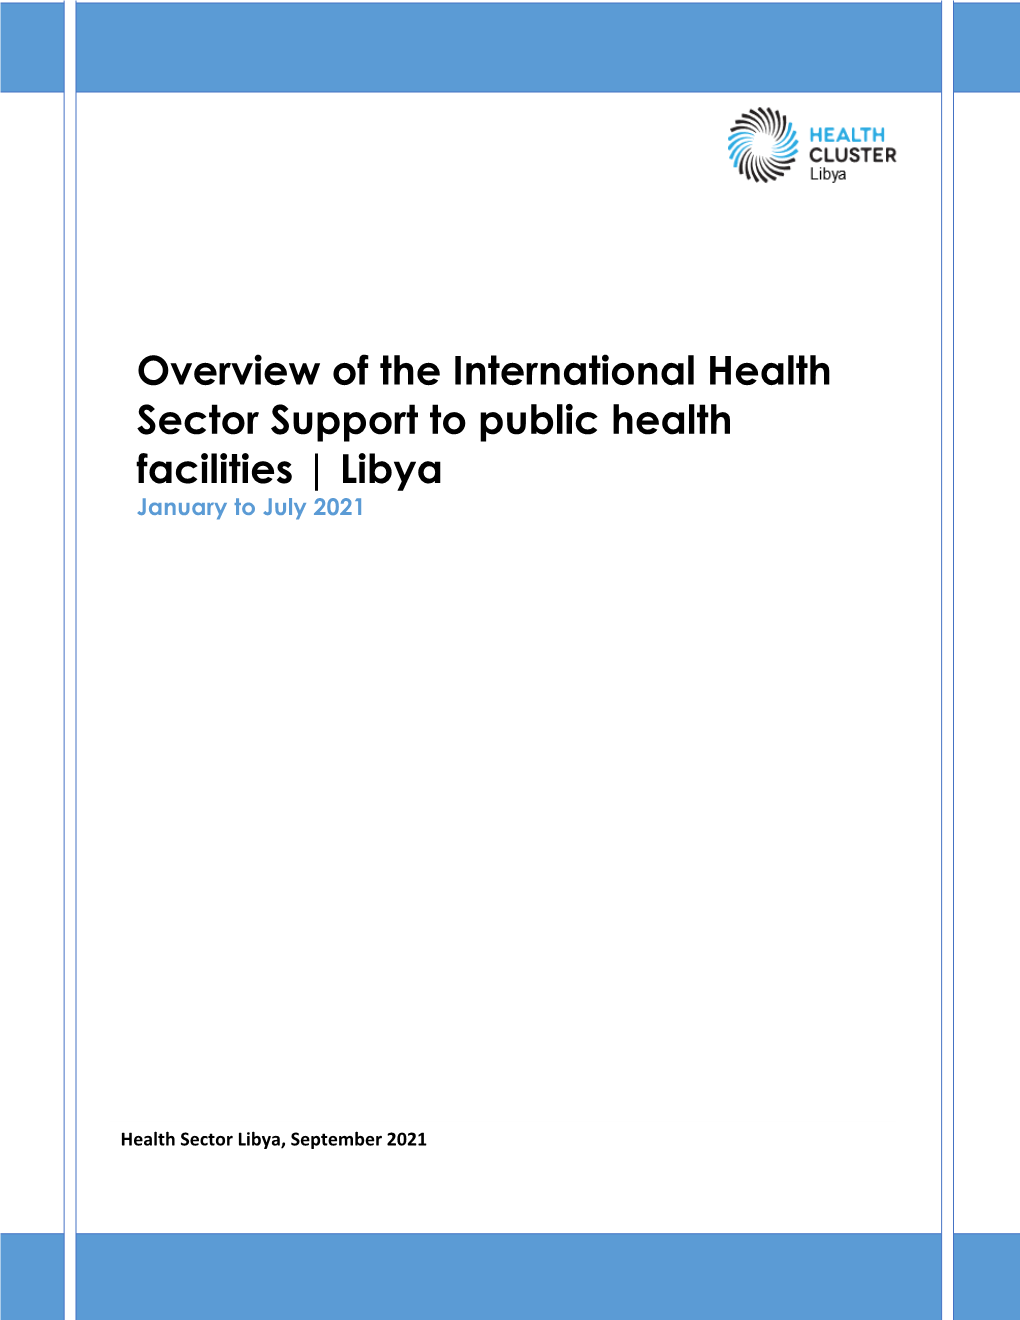 Overview of the International Health Sector Support to Public Health Facilities | Libya January to July 2021